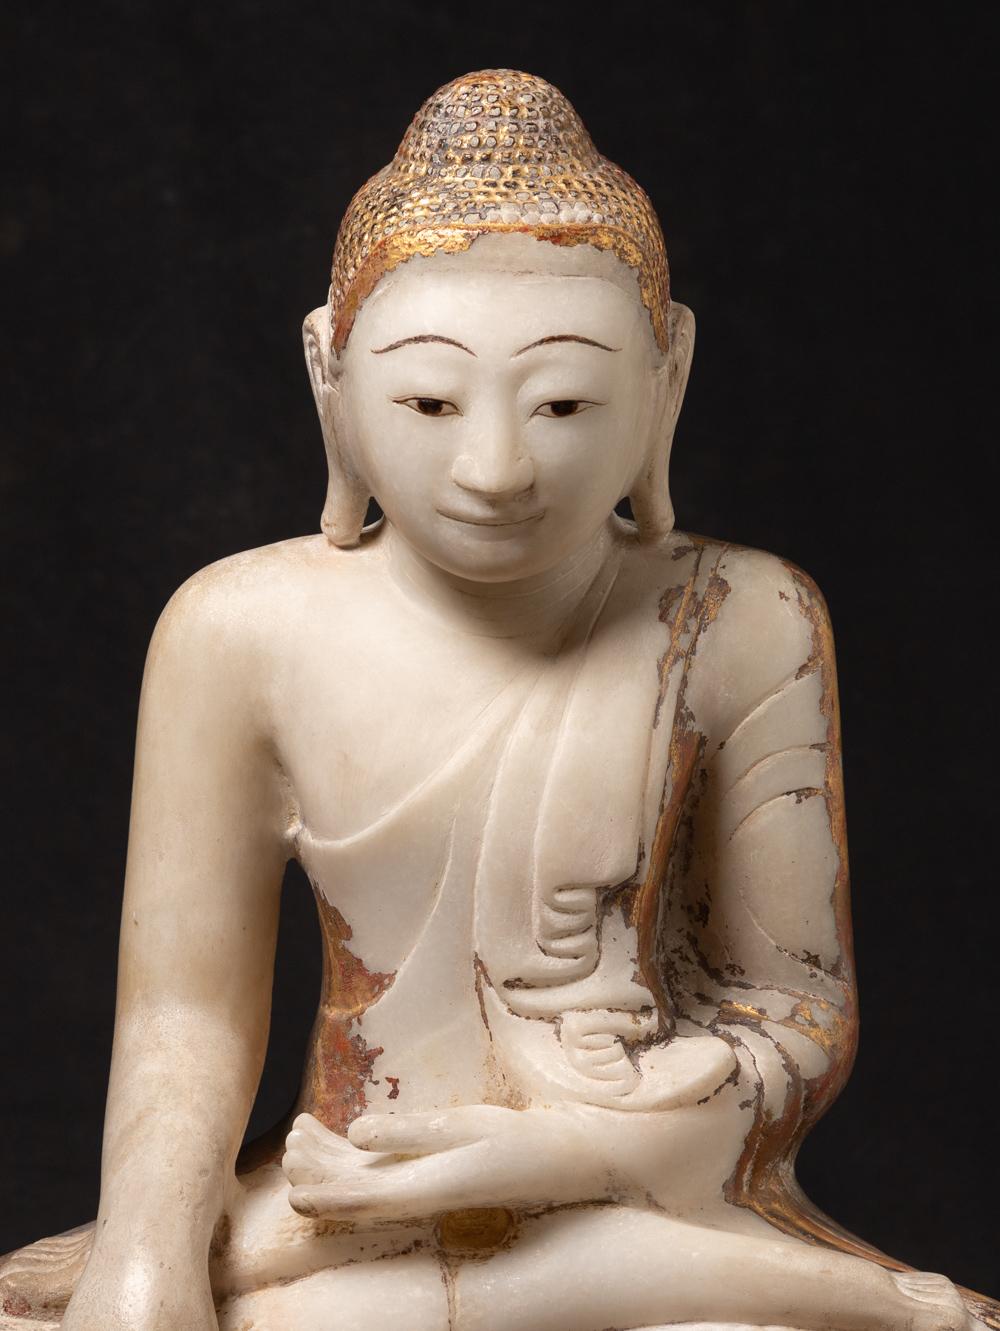 Material : marble
58,5 cm high
50,5 cm wide and 24 cm deep
With traces of the original lacquer and 24 krt. gilding
Mandalay style
Bhumisparsha mudra
19th century
Weight: 49,75 kgs
Originating from Burma
Nr: 3664-3